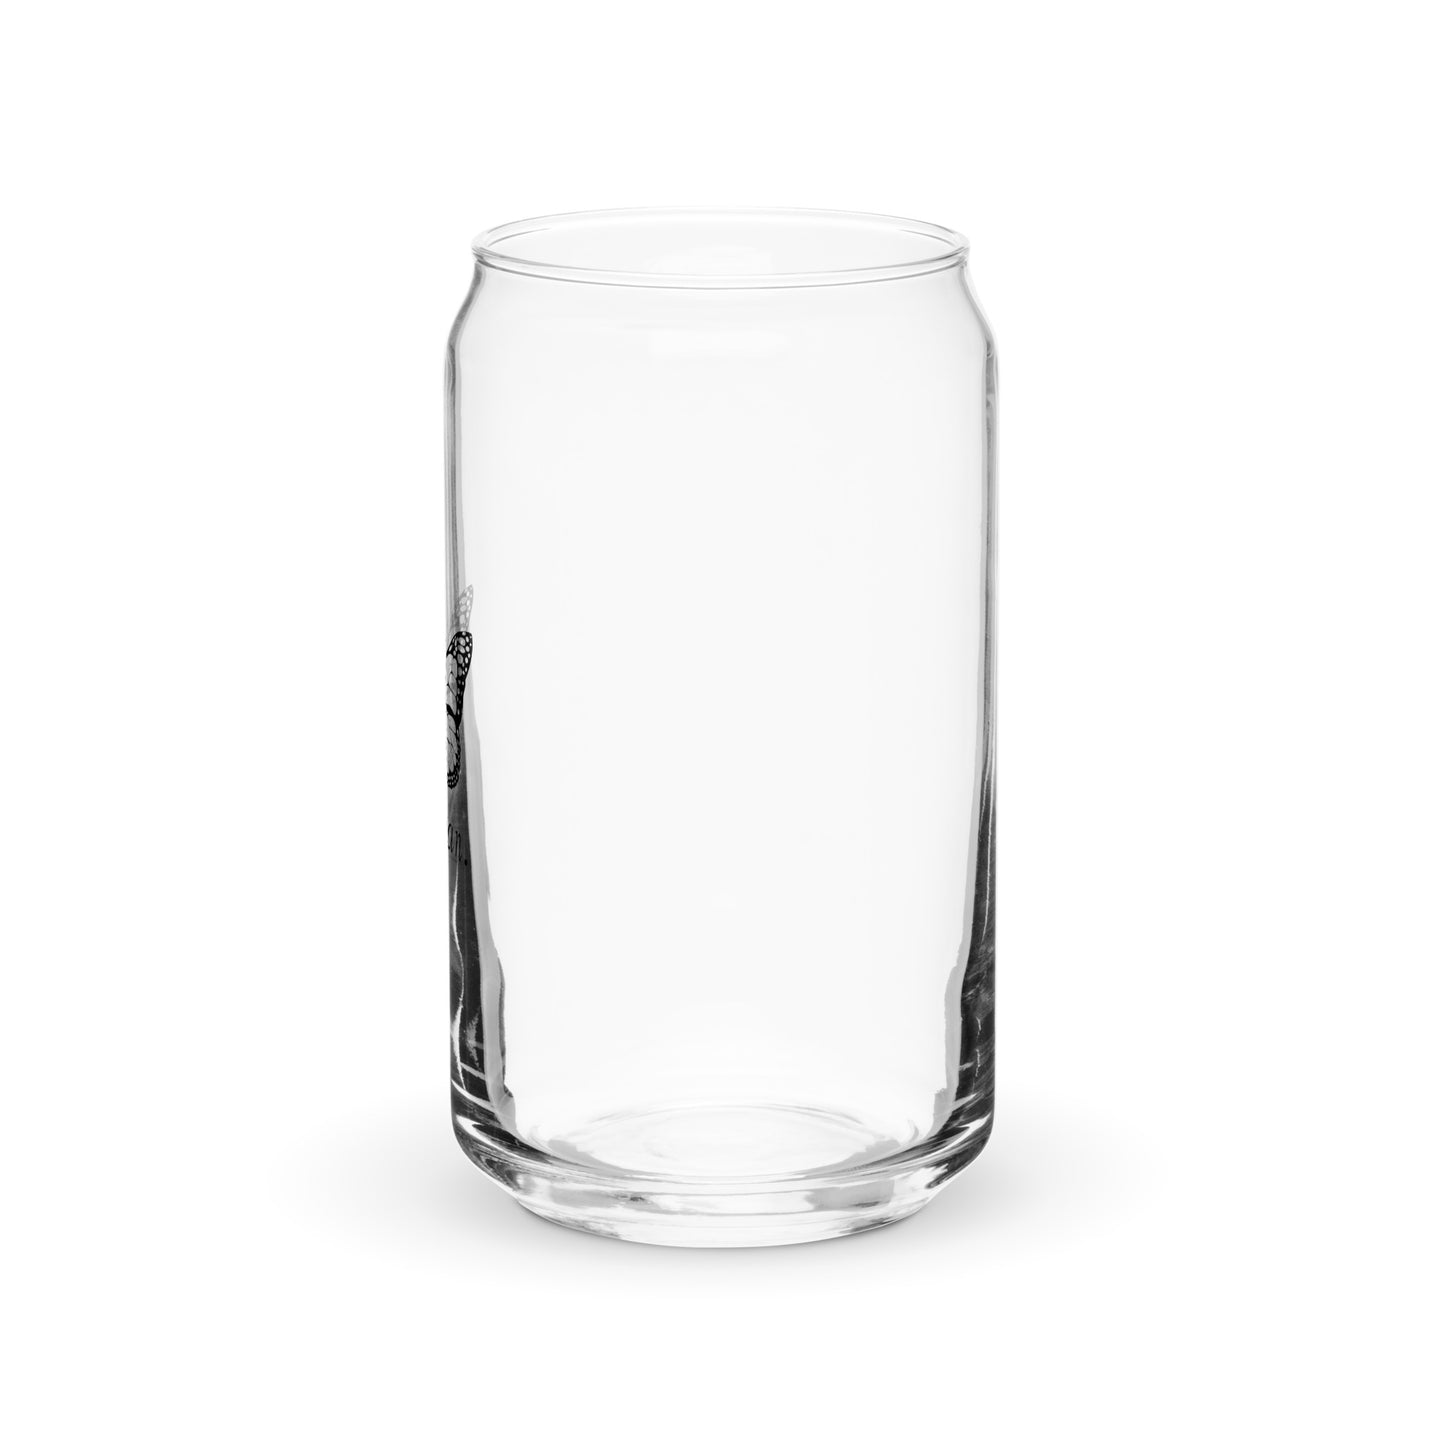 You Can Can-shaped glass